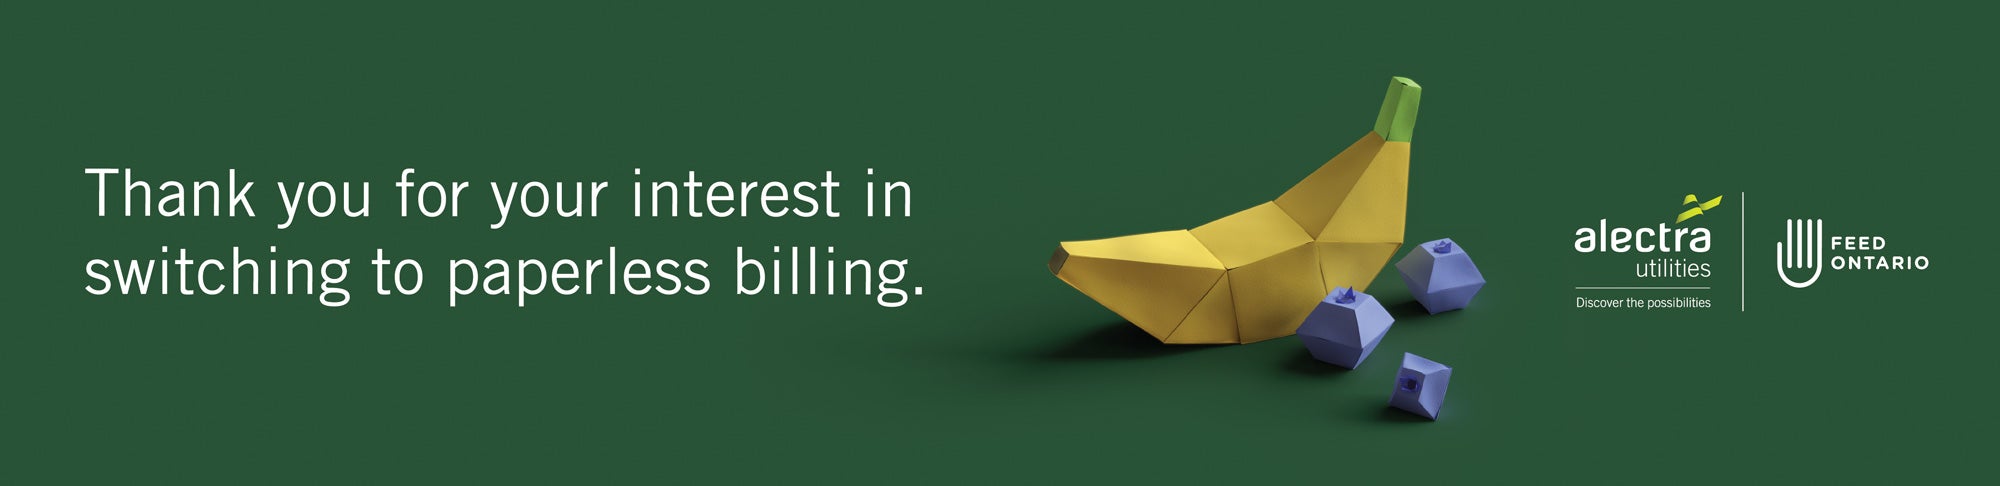 Thank you for your interest in switching to paperless billing.